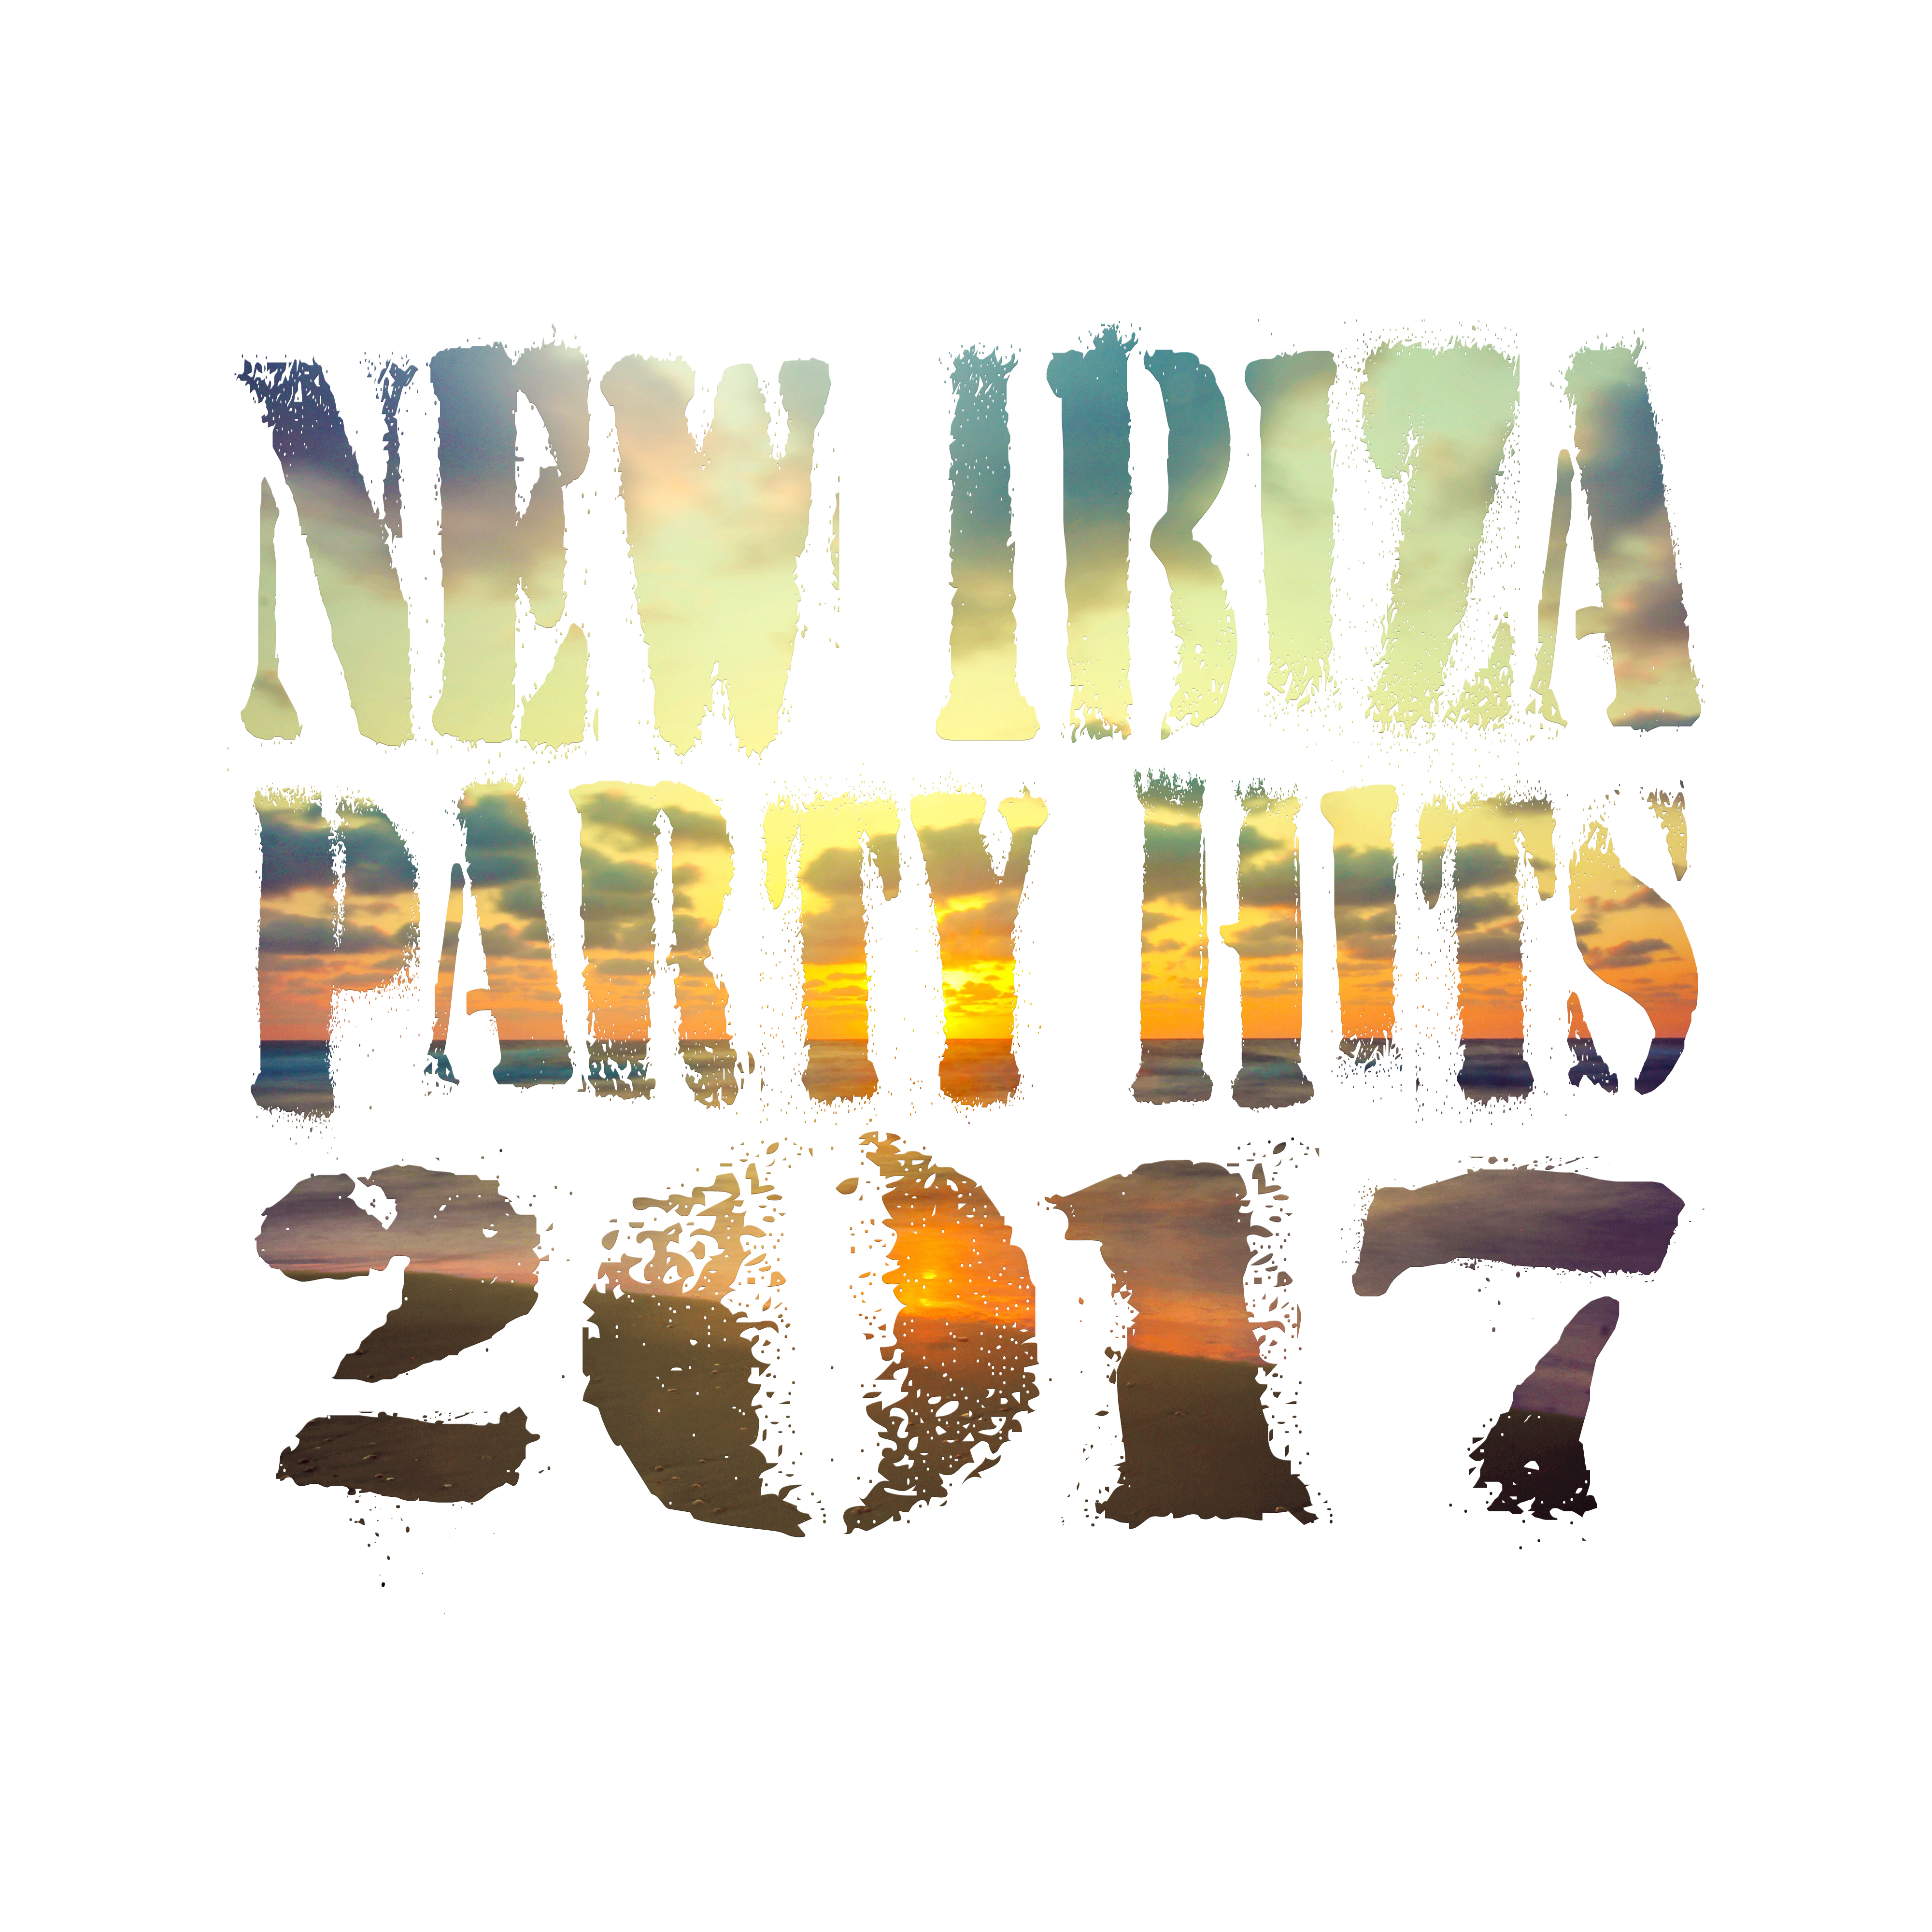 New Ibiza Party Hits 2017 – Summertime Party Hits 2017, Relax, Under The Palms, Downbeat, Lounge